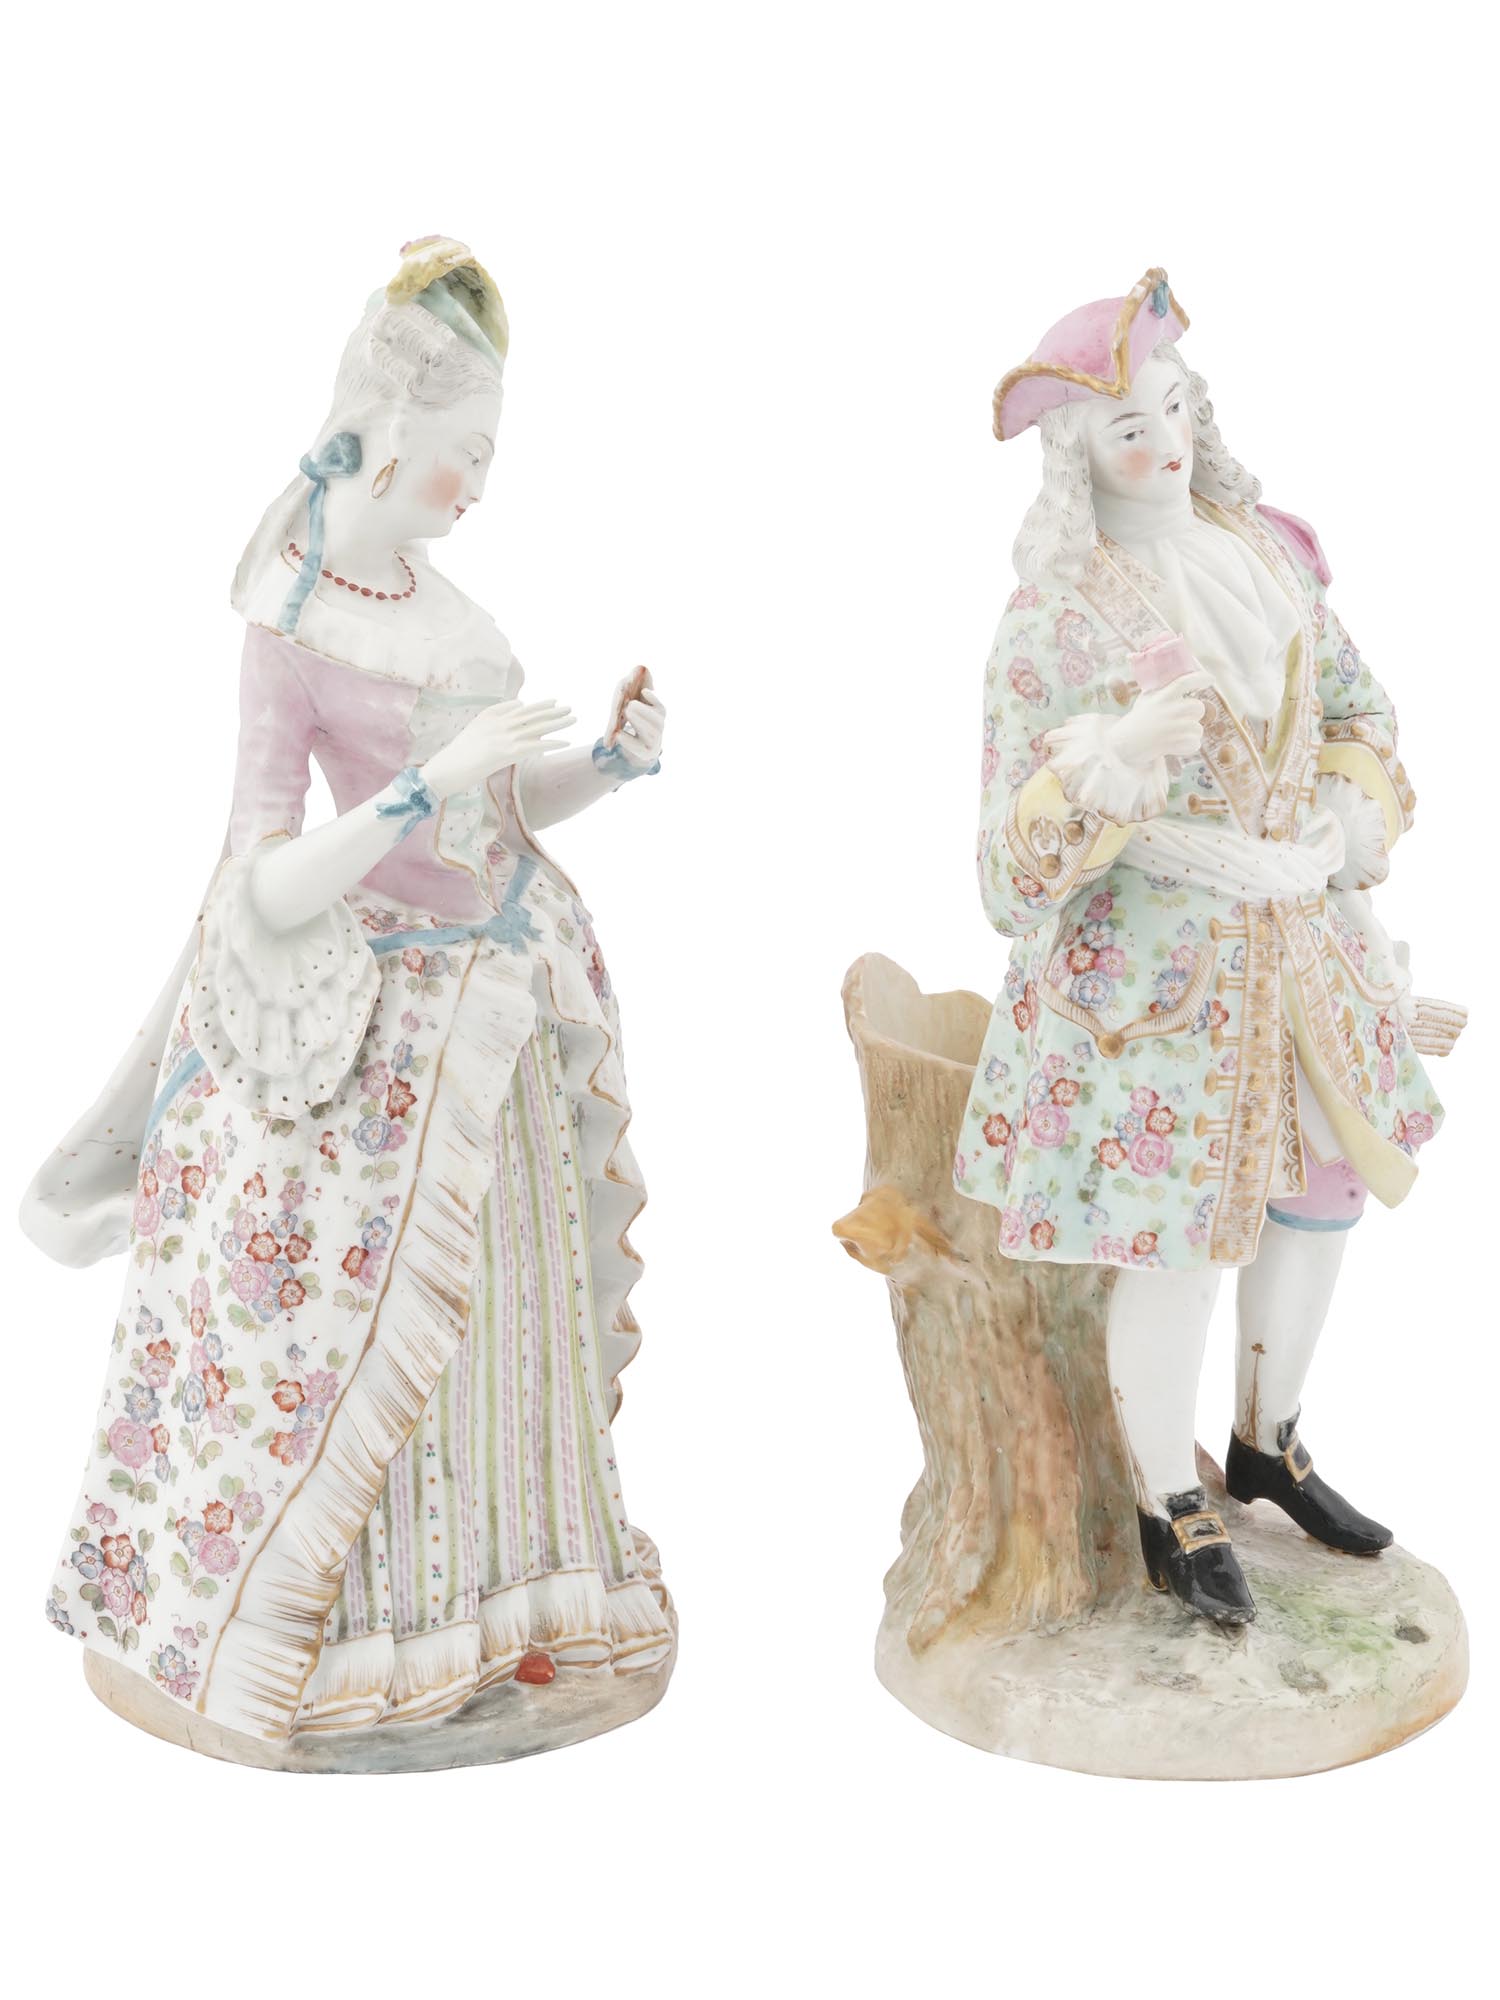 GERMAN ROCOCO PORCELAIN FIGURINES BY MEISSEN PIC-1